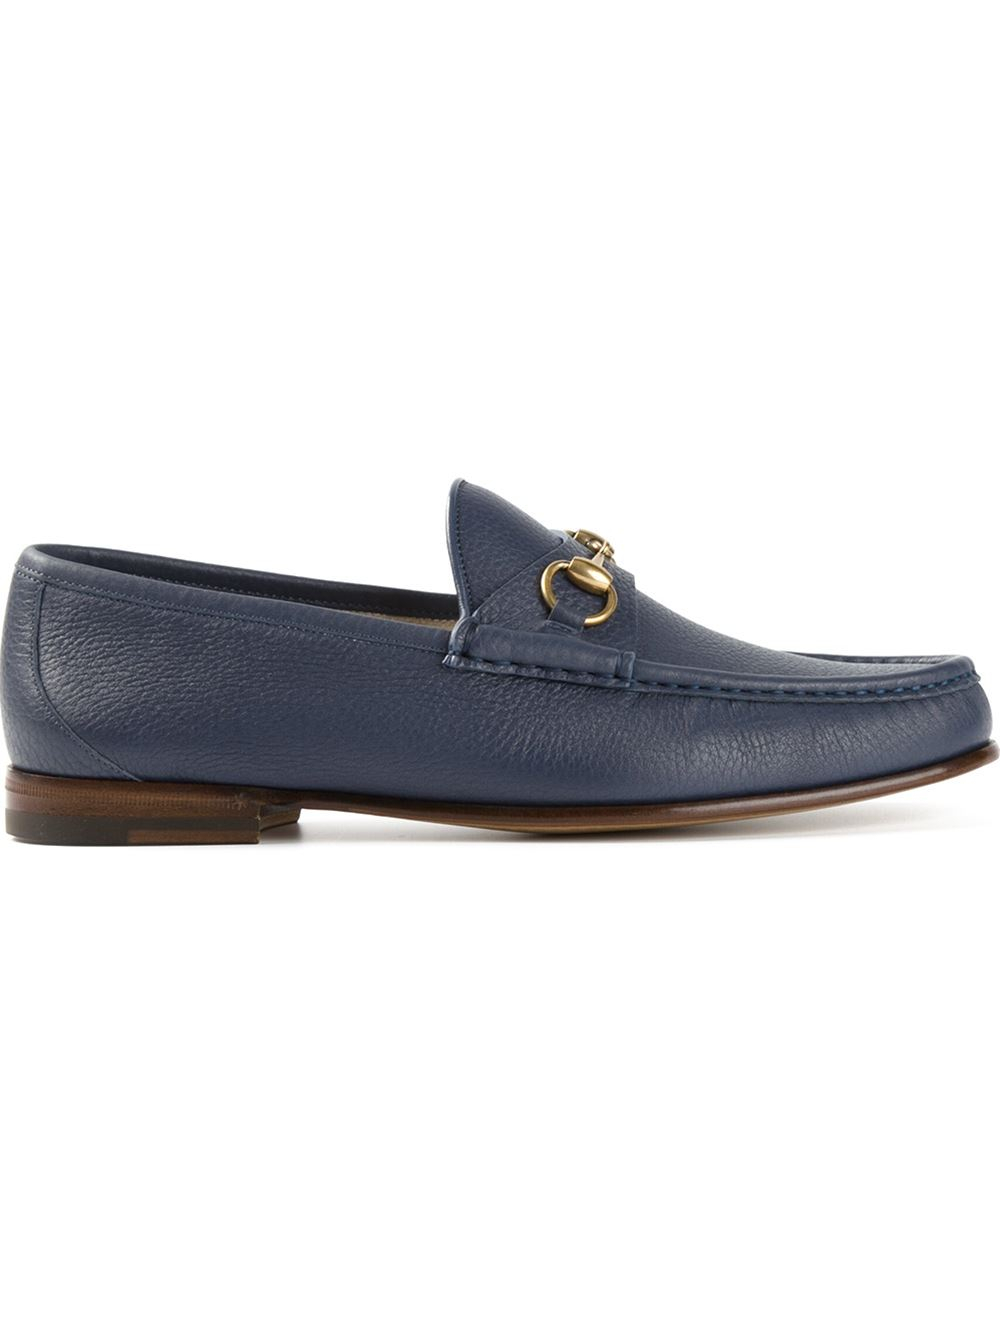 Gucci Horse Bit Loafers in Blue for Men - Lyst